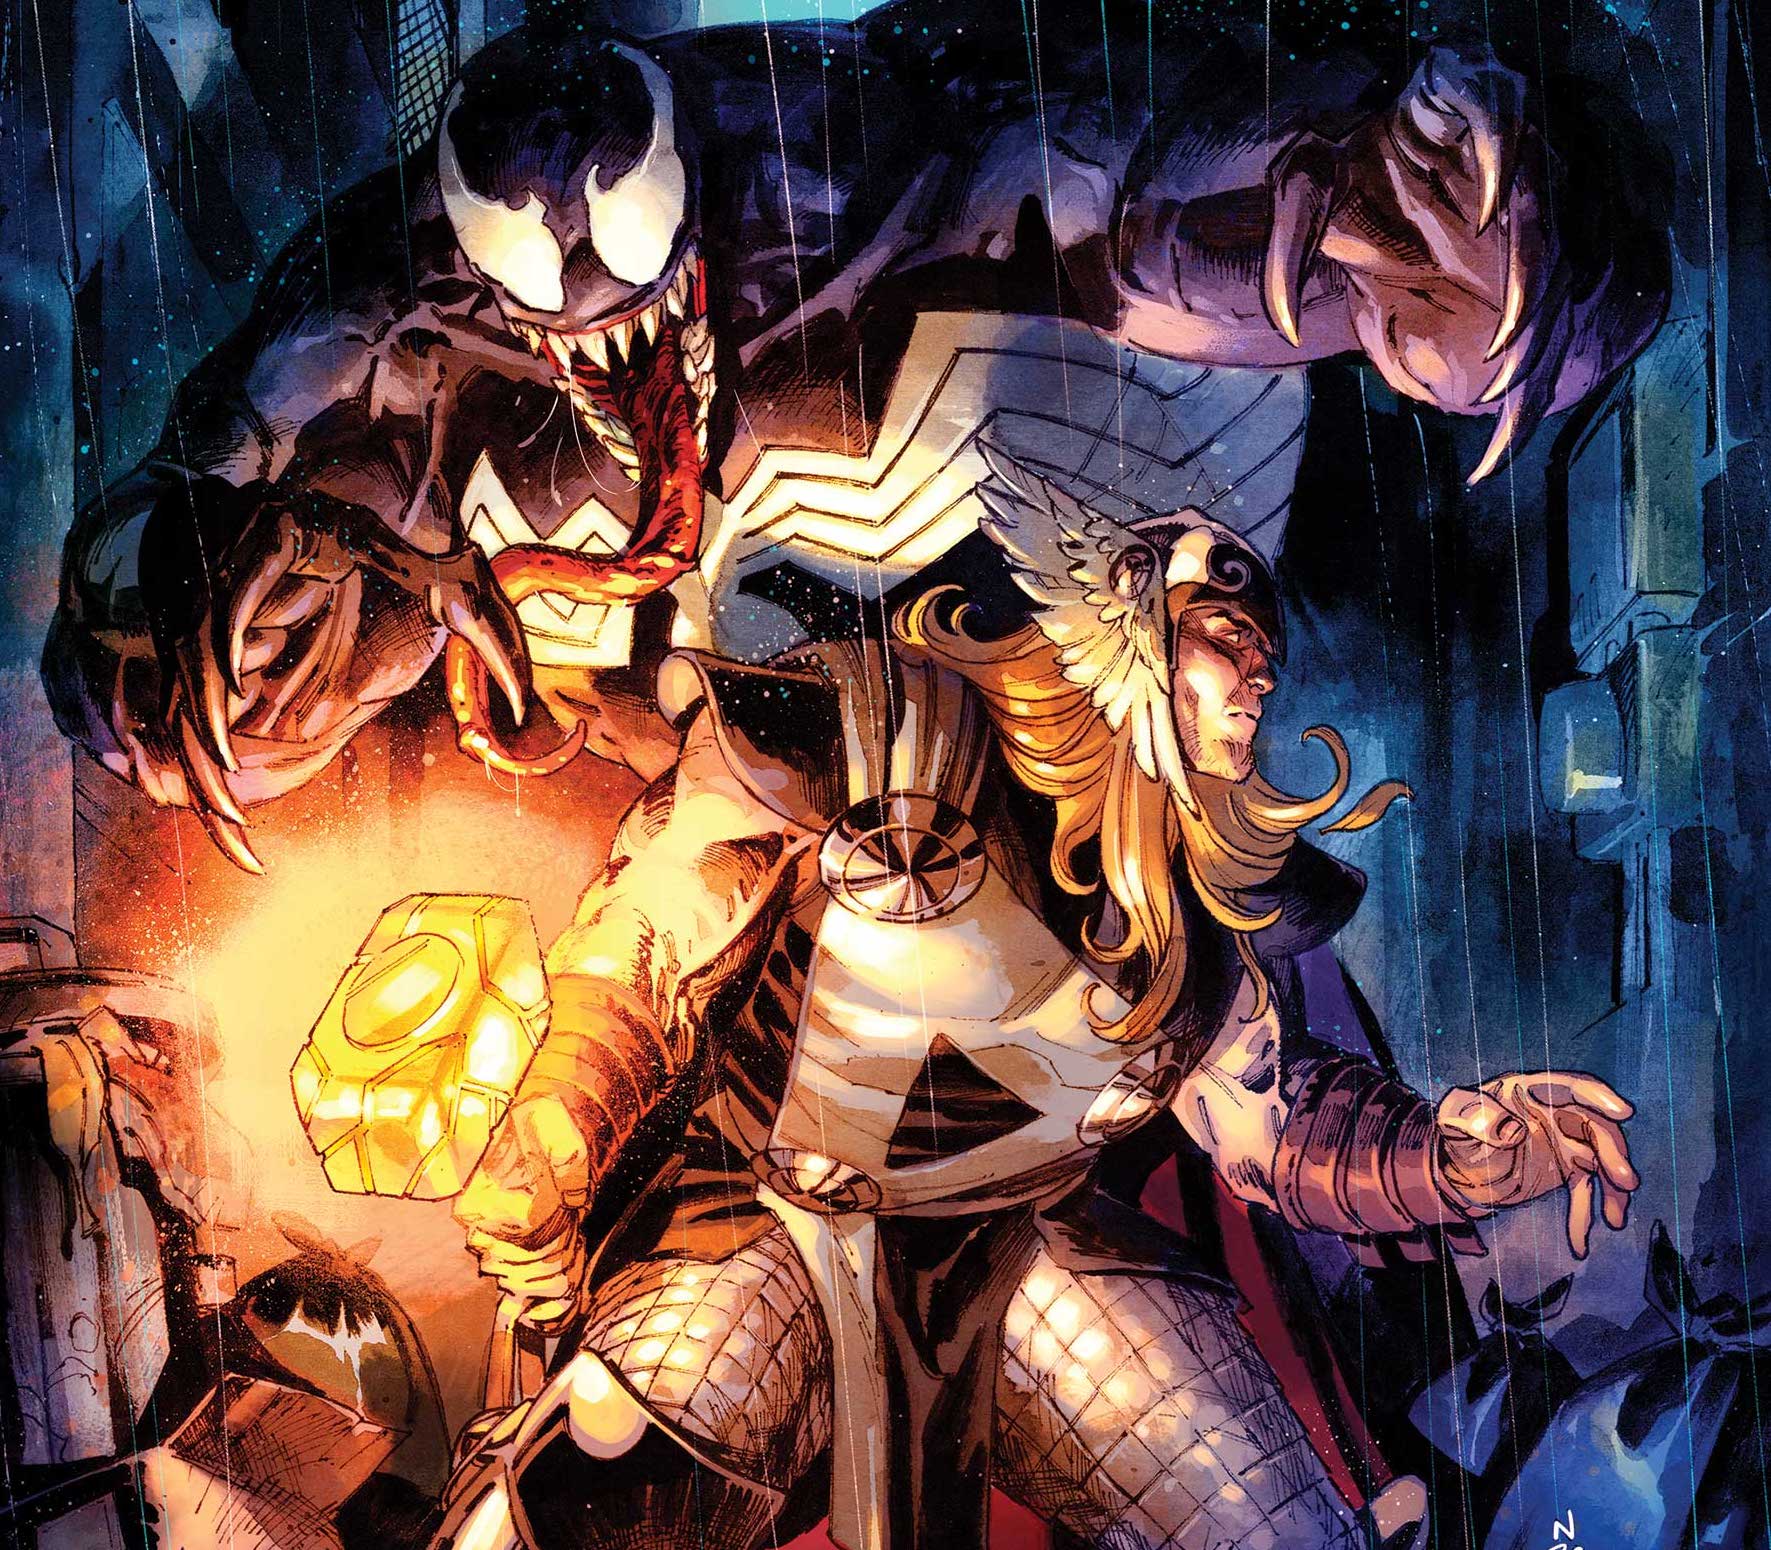 Thor will team up with Venom in 'Thor' #27